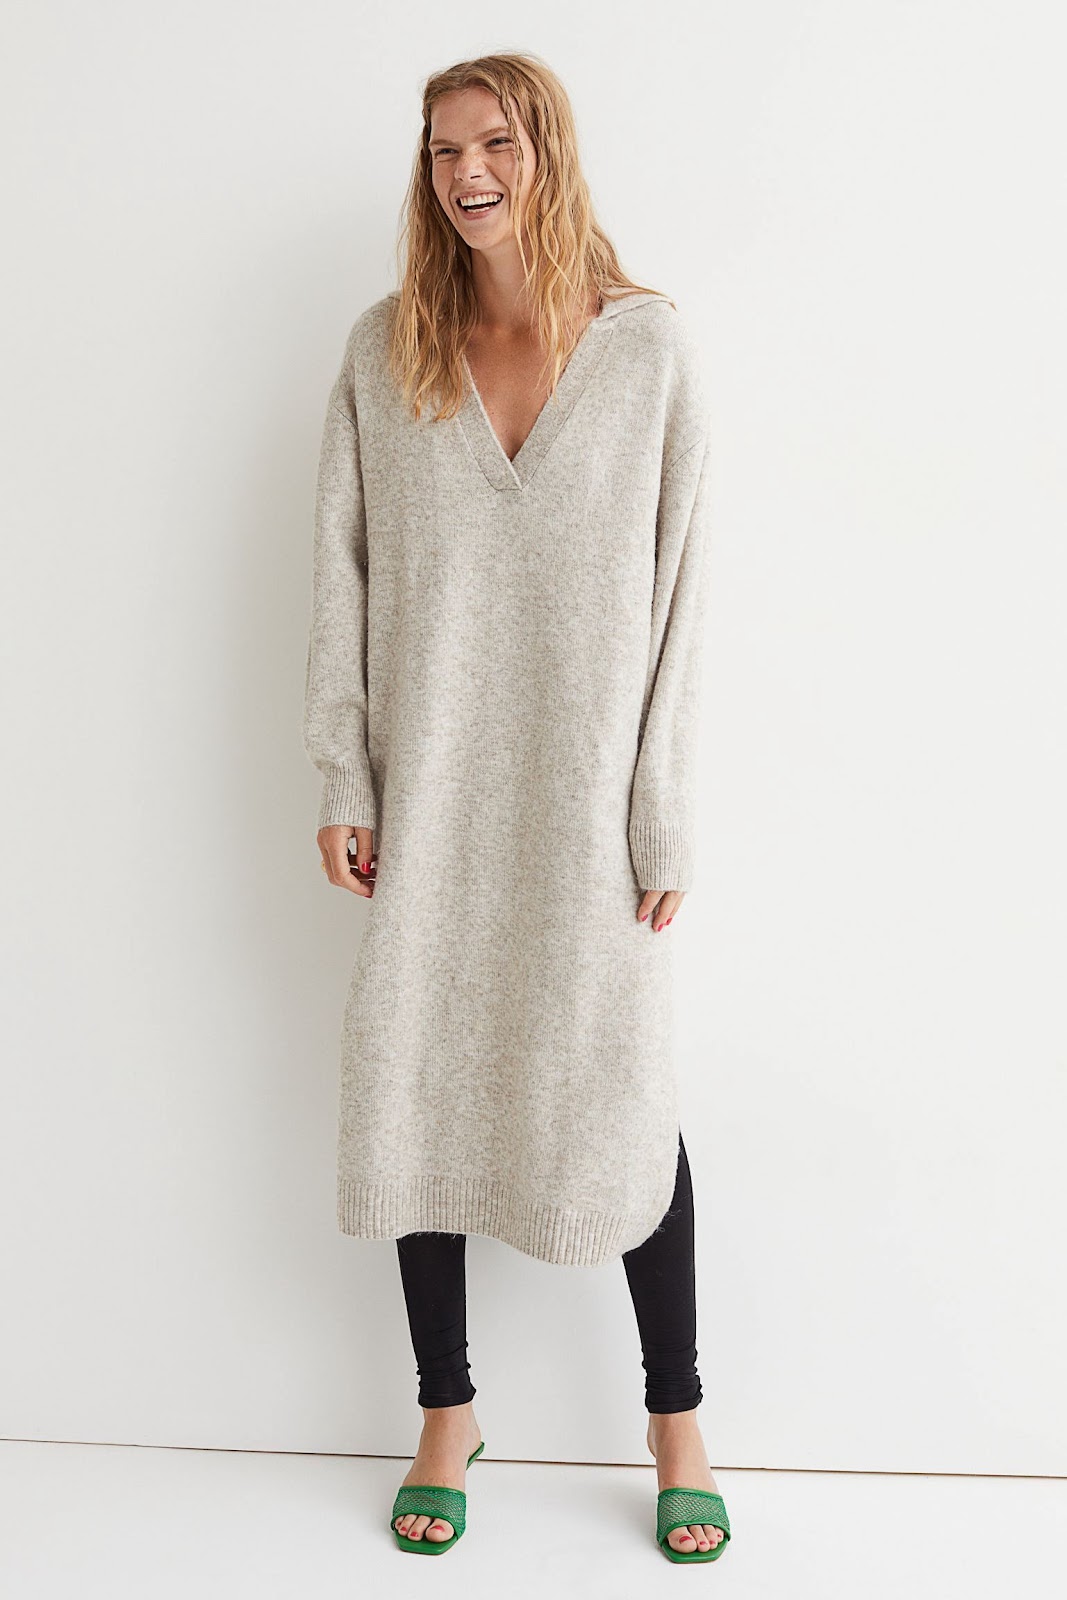 Last Minute Holiday Party Outfit Idea — Cozy Chic Minimalist Look With Long Beige Sweater Dress, Black Leggings and Green Mesh Mule Heels